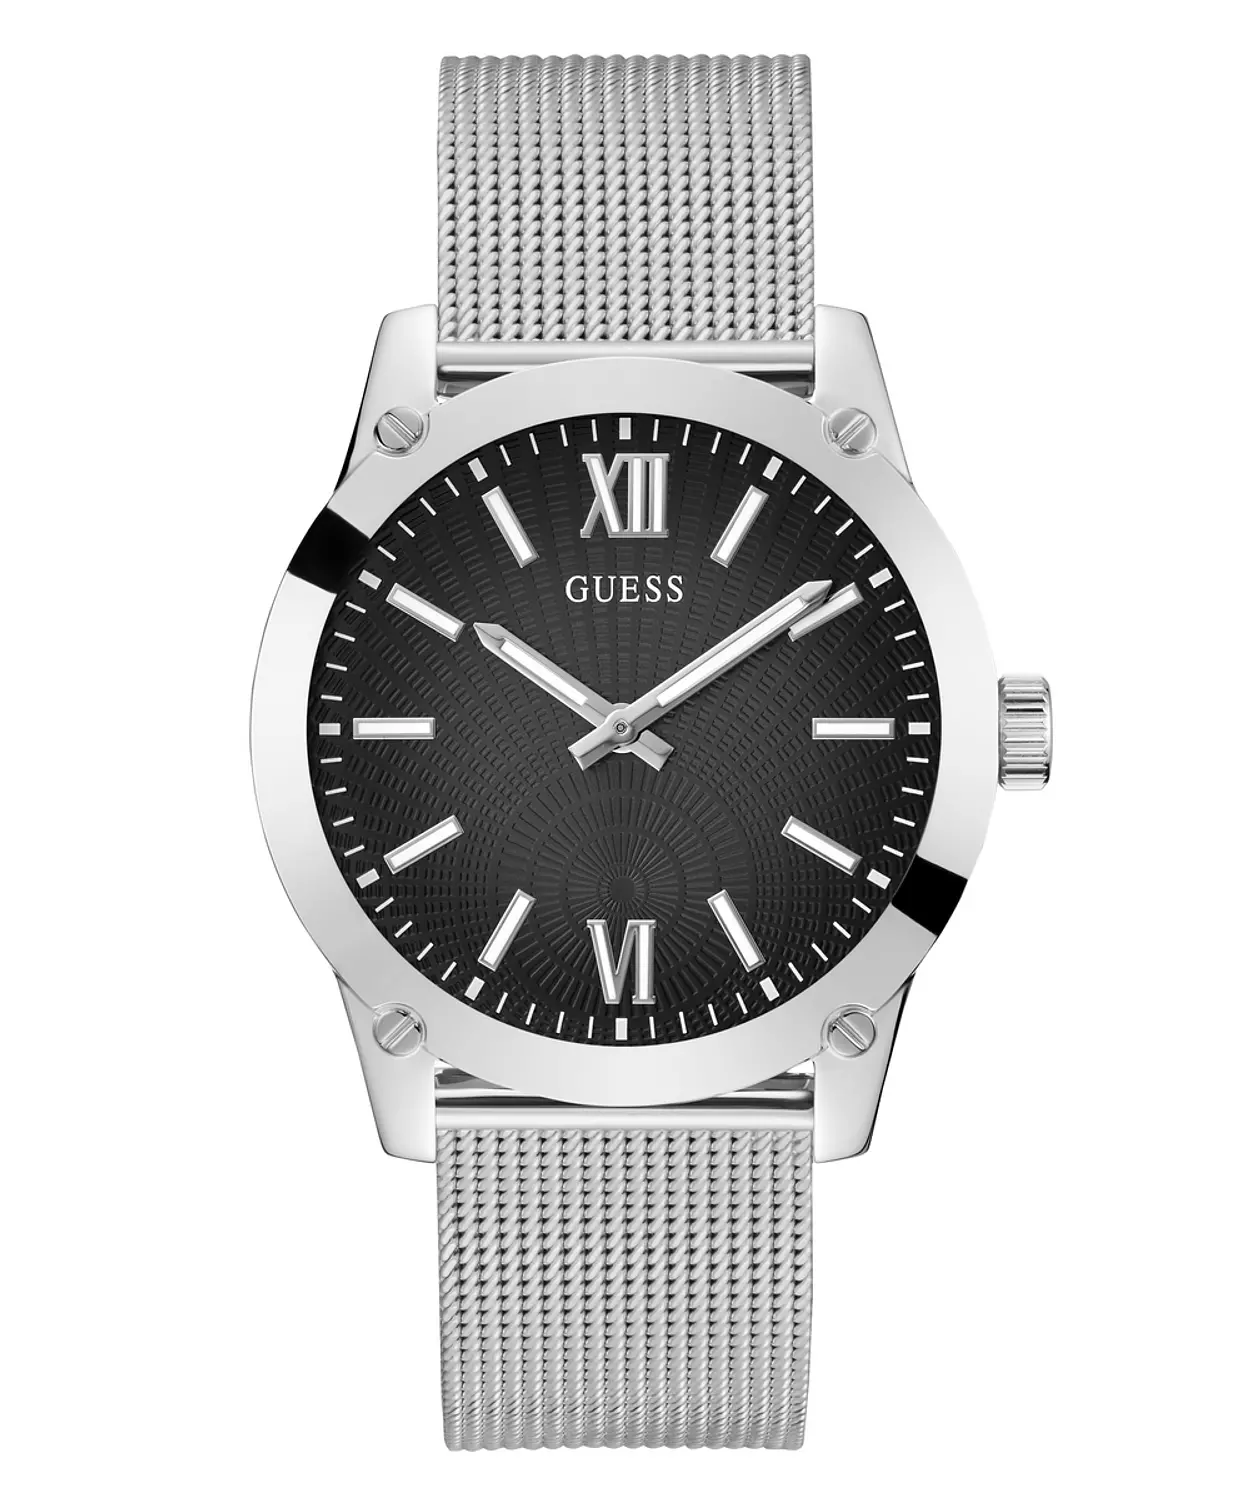 GUESS GW0629G1 ANALOG WATCH  For Men Silver Stainless Steel/Mesh Polished Bracelet  0